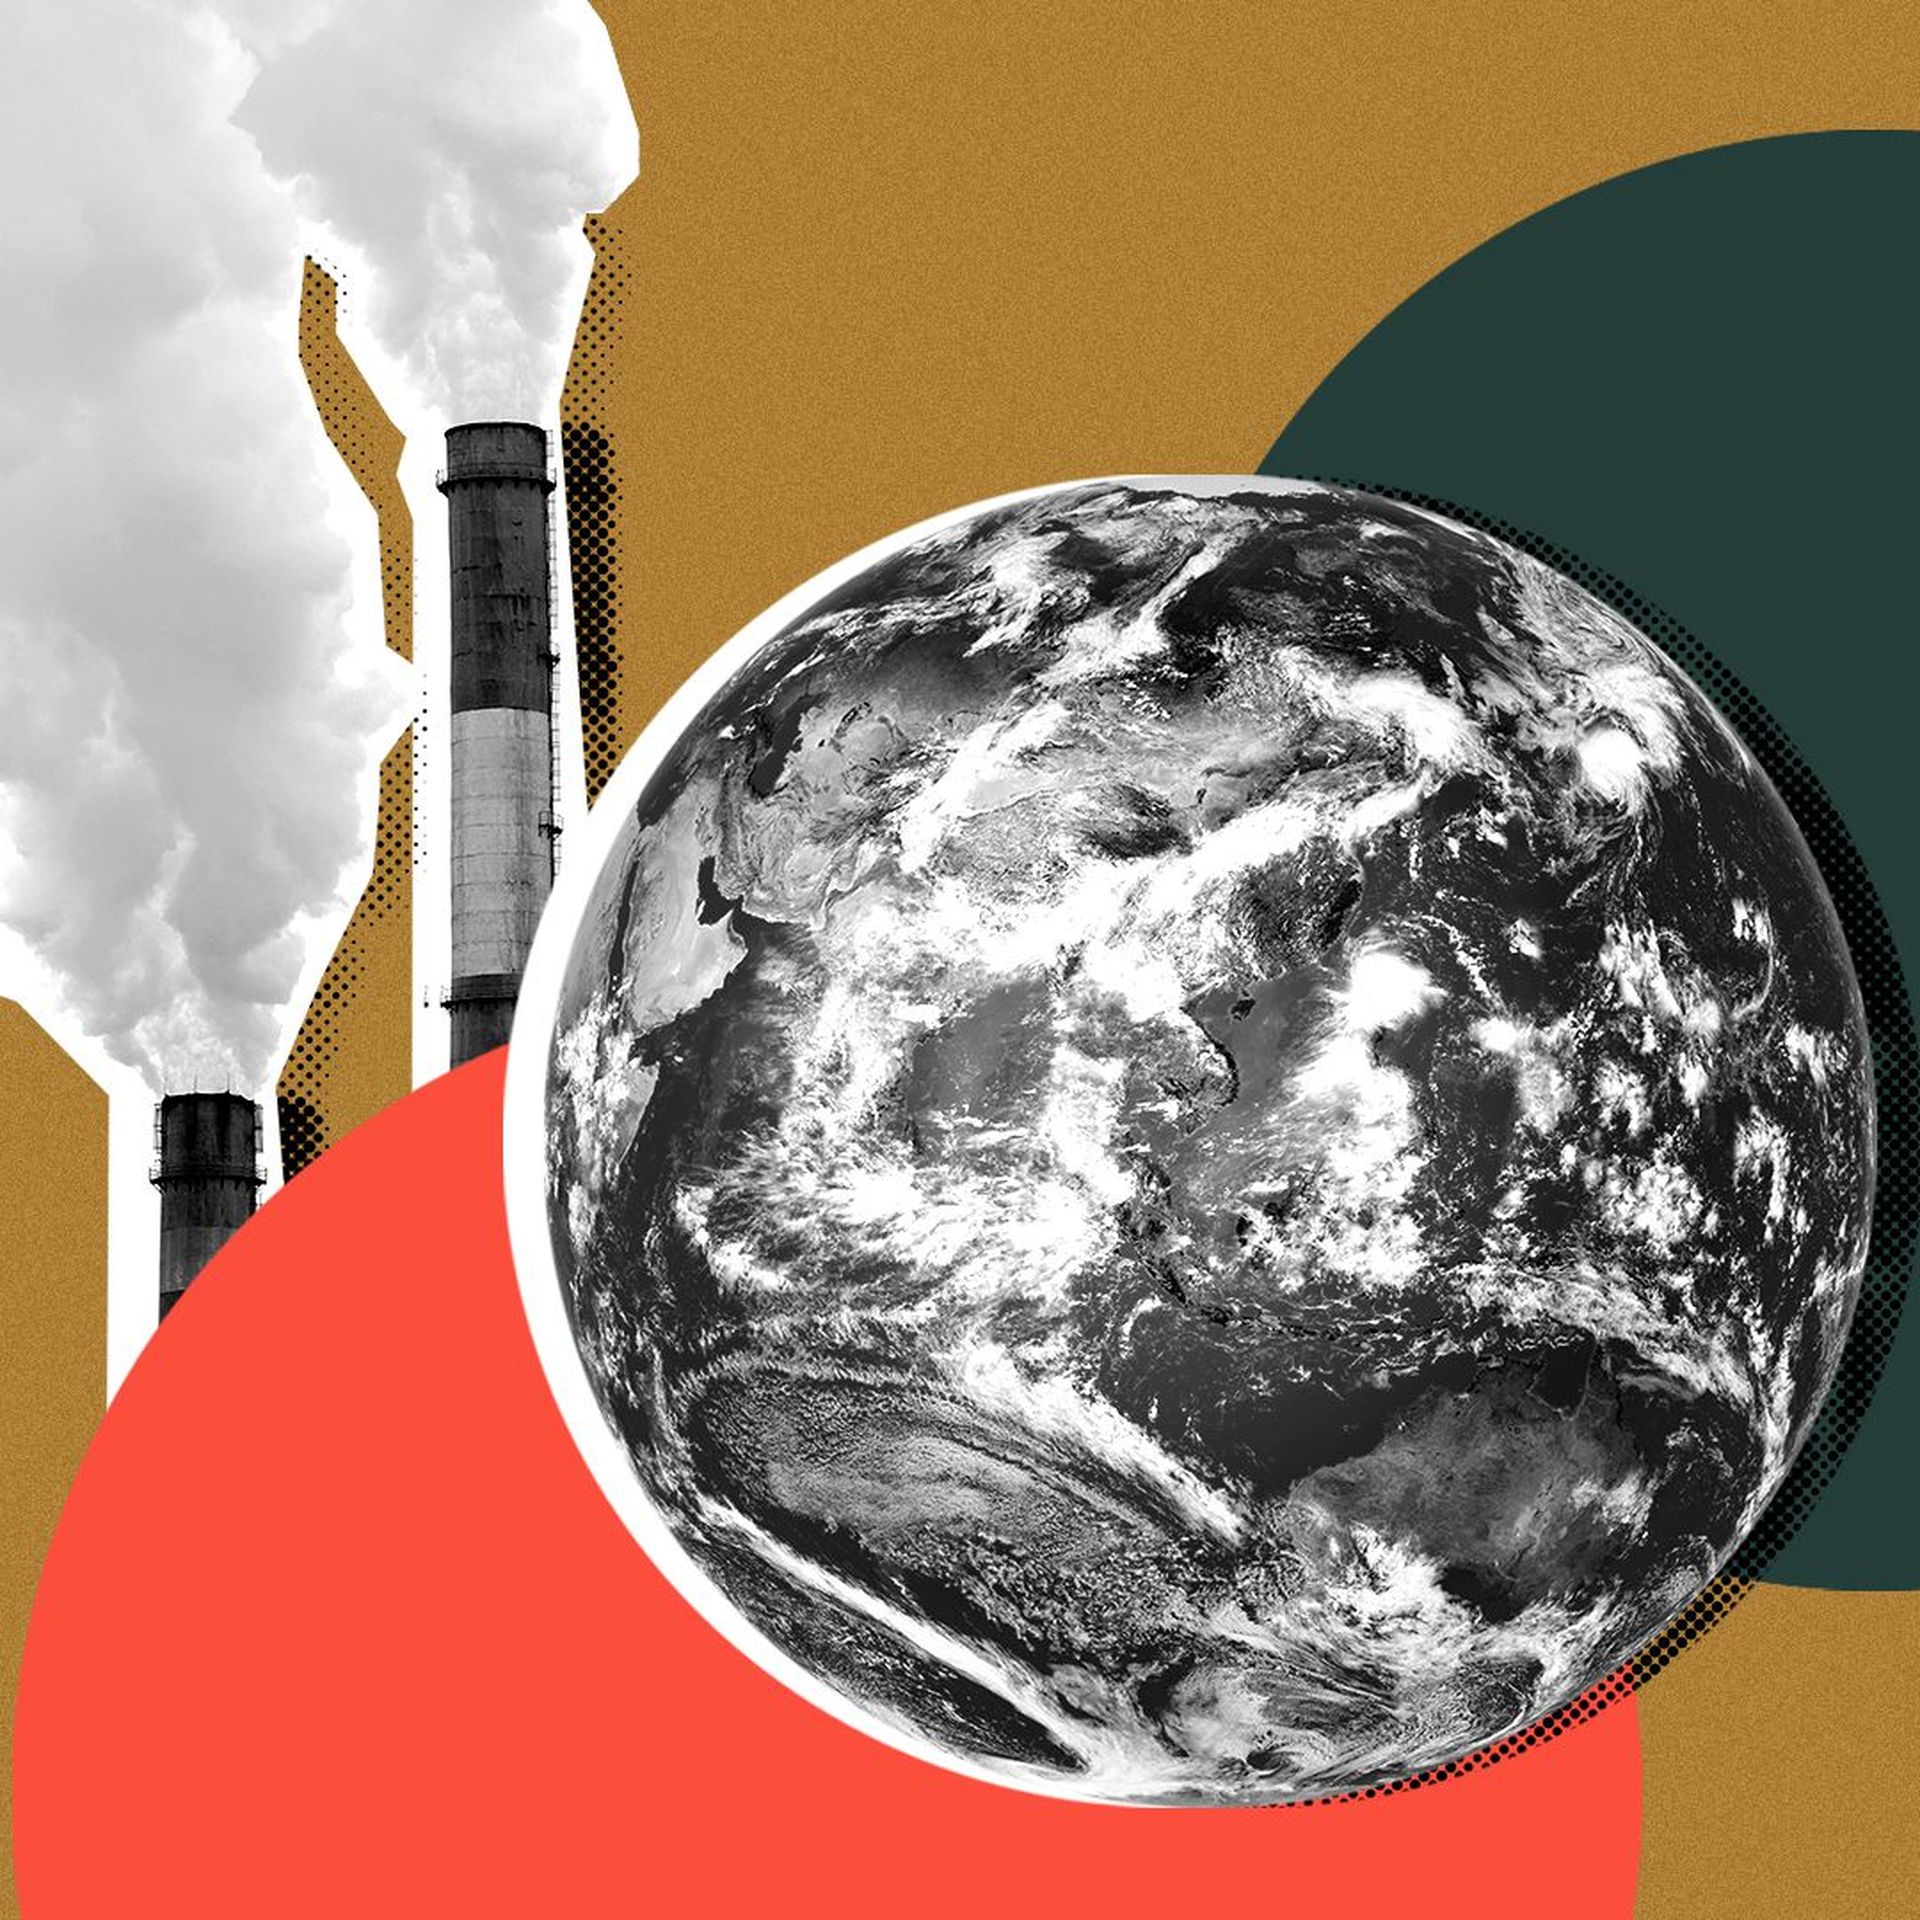 Illustration of a collage with images of the earth and industrial chimneys